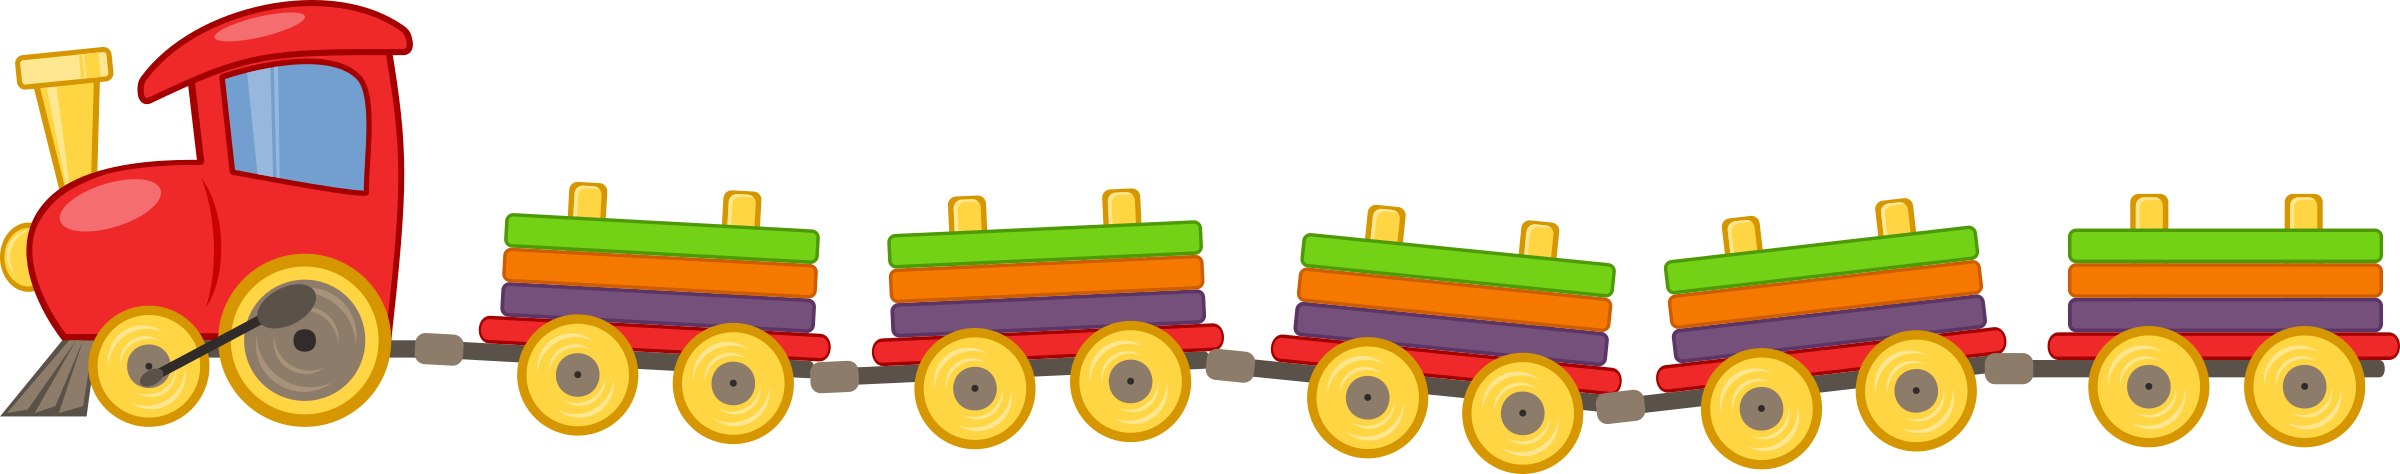  collection of train. Transportation clipart toy